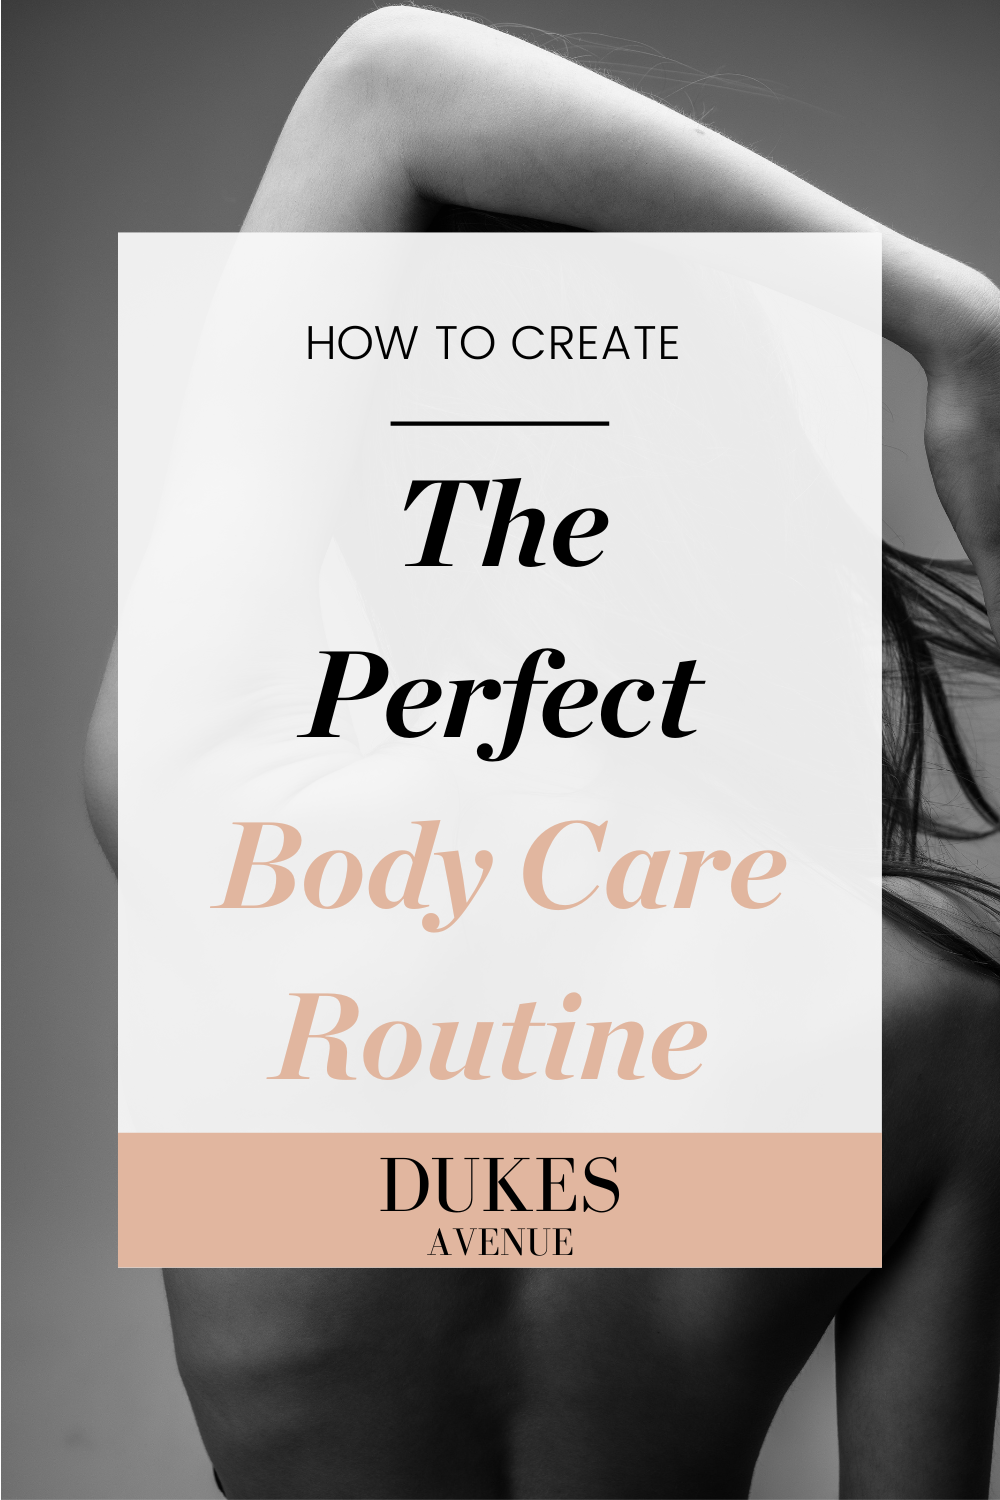 Black and white image of woman's back with text overlay 'The Perfect Body Care Routine'